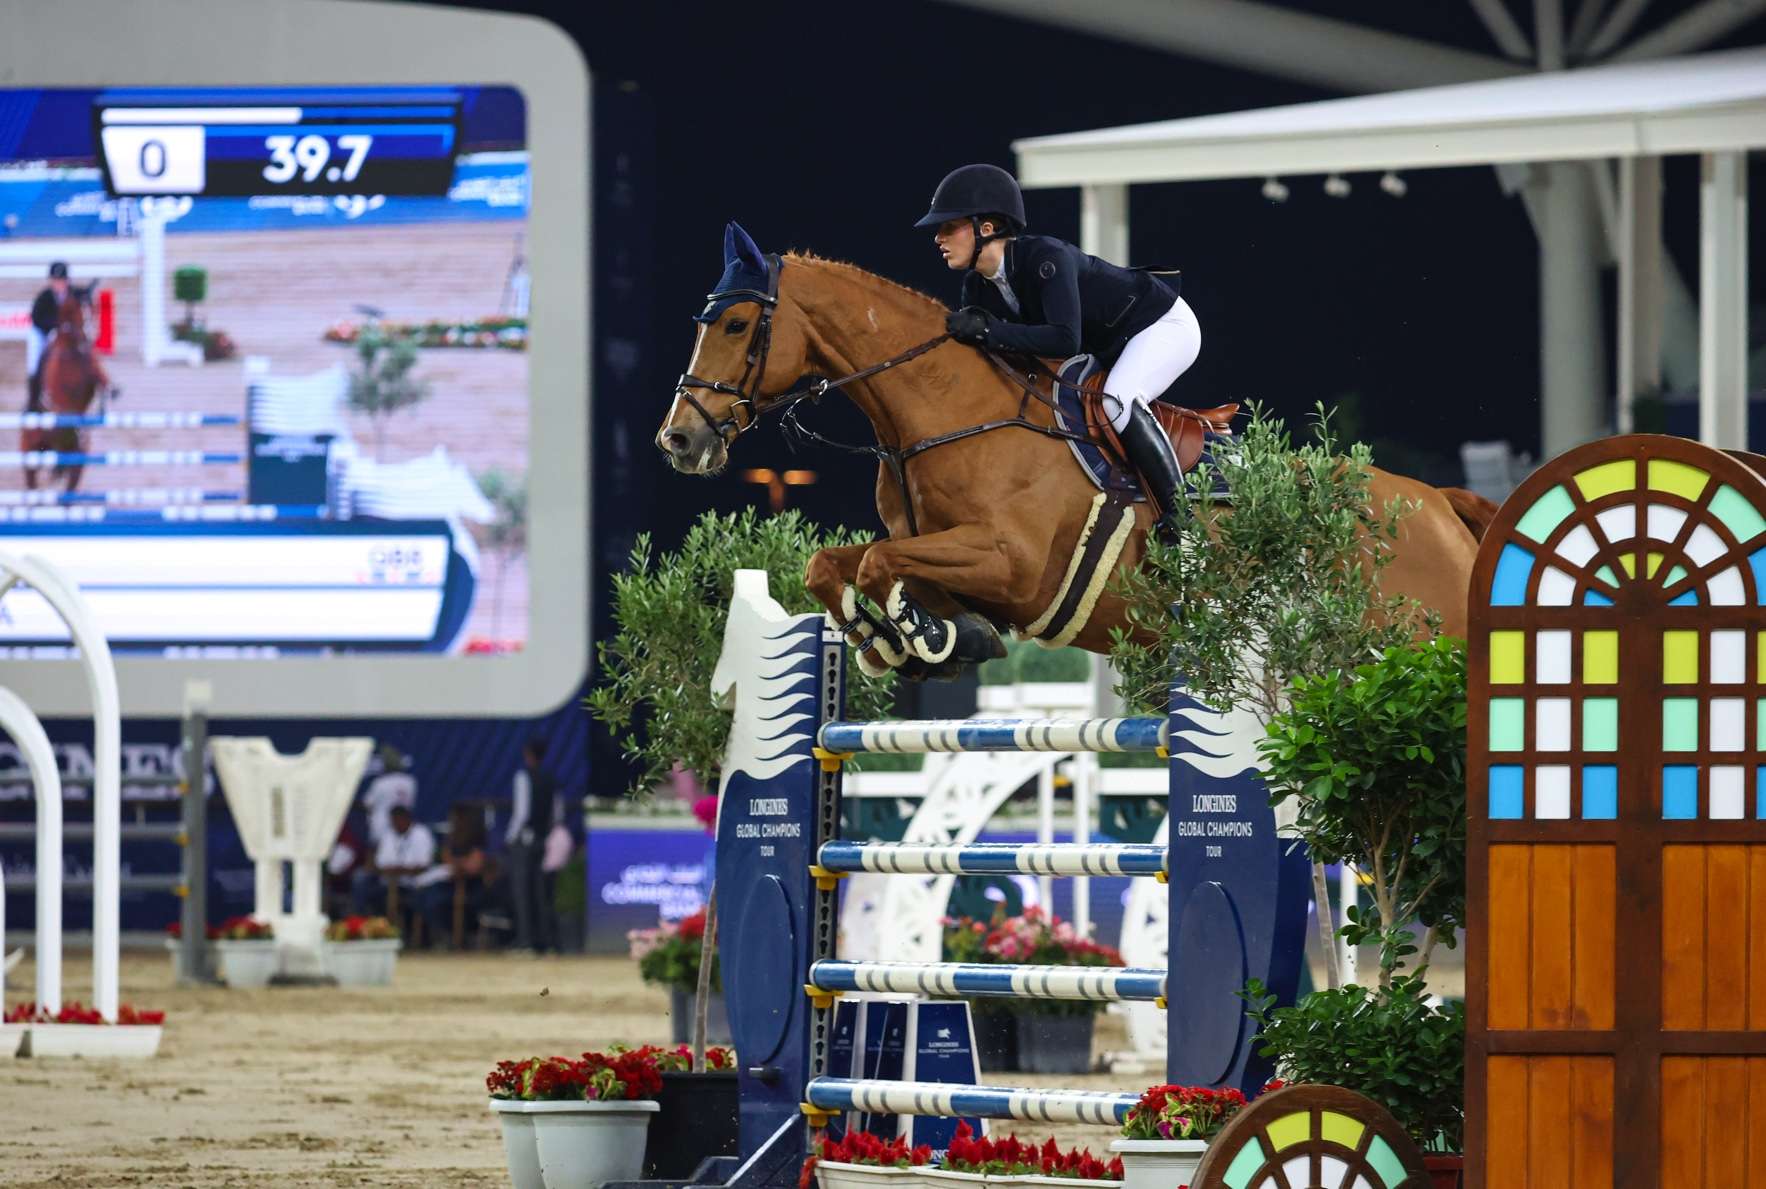 LGCT Doha CSI 5* 1.45m speed class 3rd place Lily Attwood with her Karibou Horta